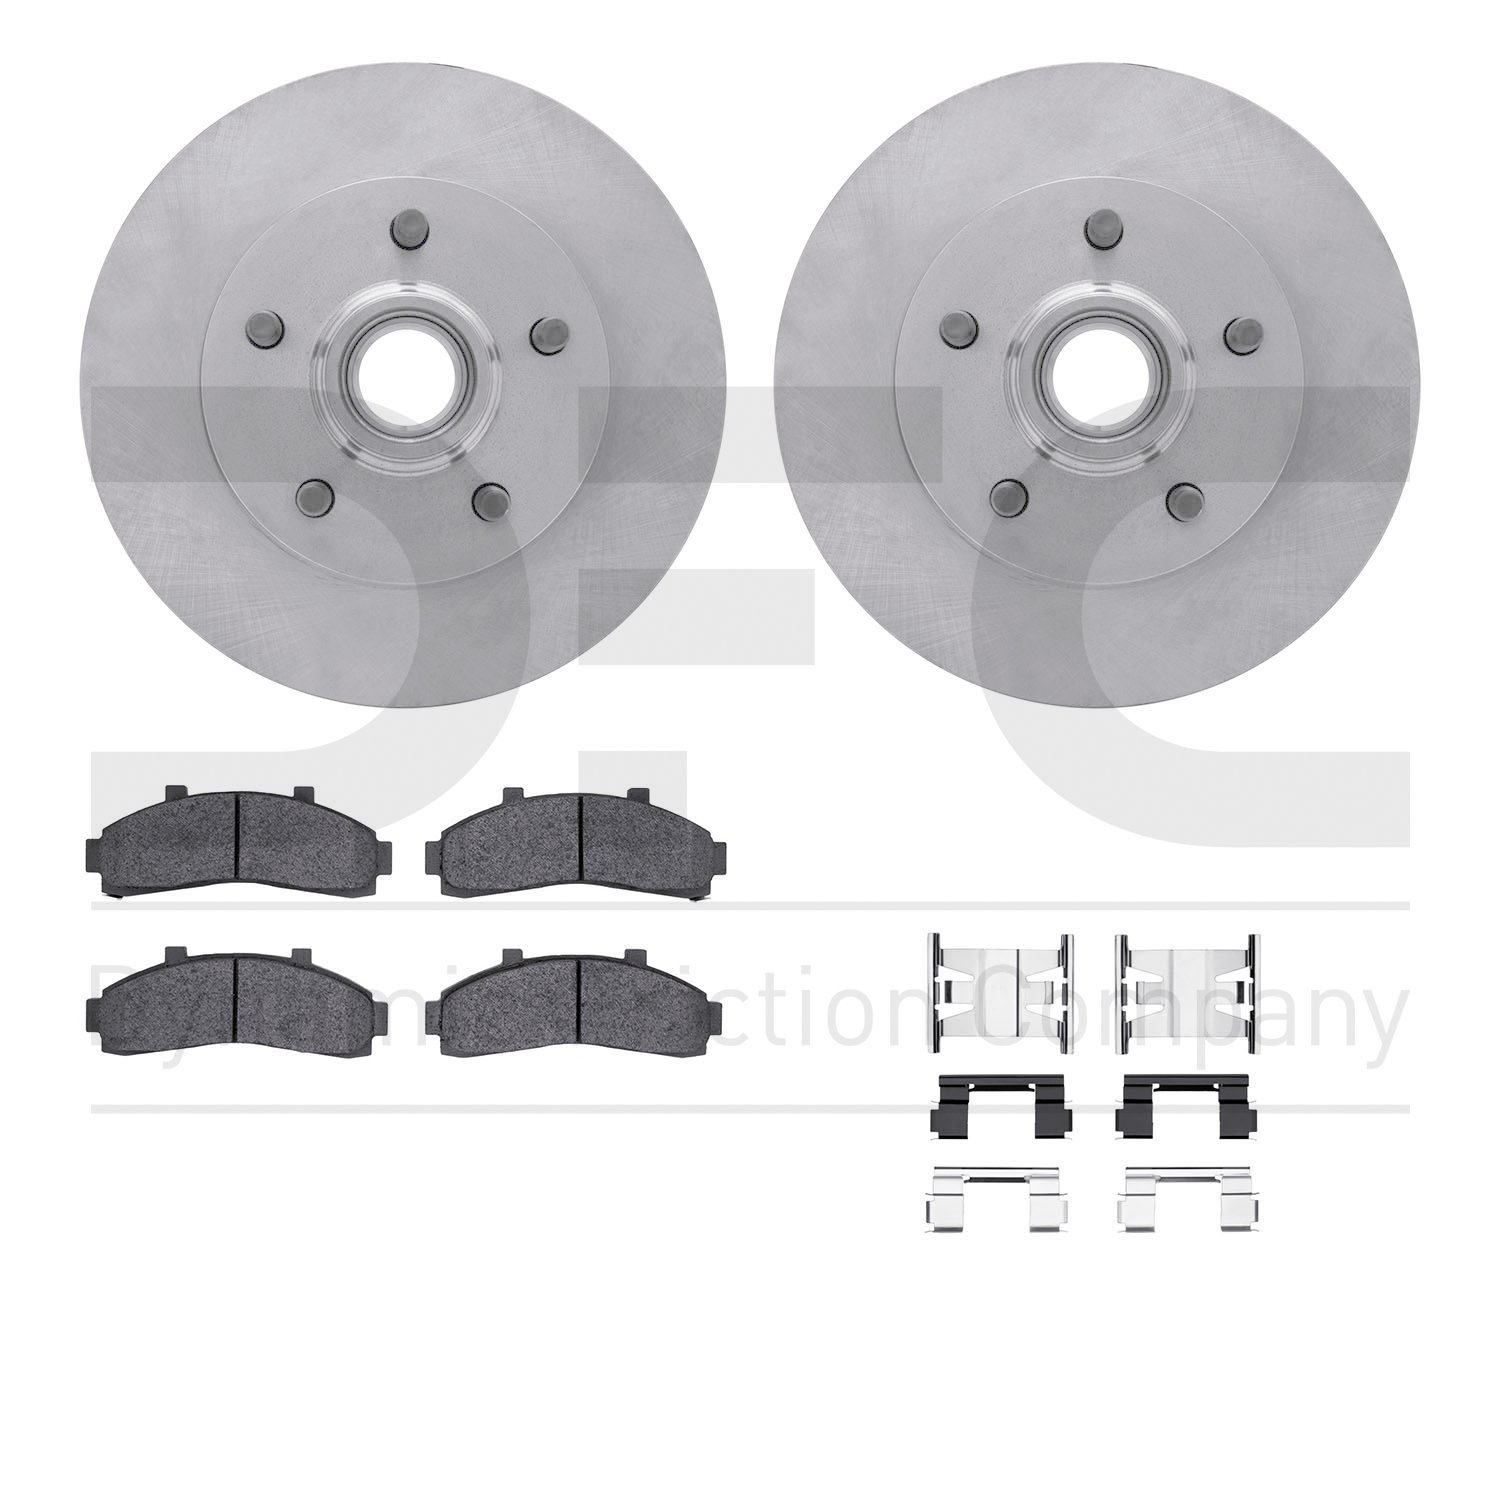 6412-54152 Brake Rotors with Ultimate-Duty Brake Pads Kit & Hardware, 1998-2002 Ford/Lincoln/Mercury/Mazda, Position: Front